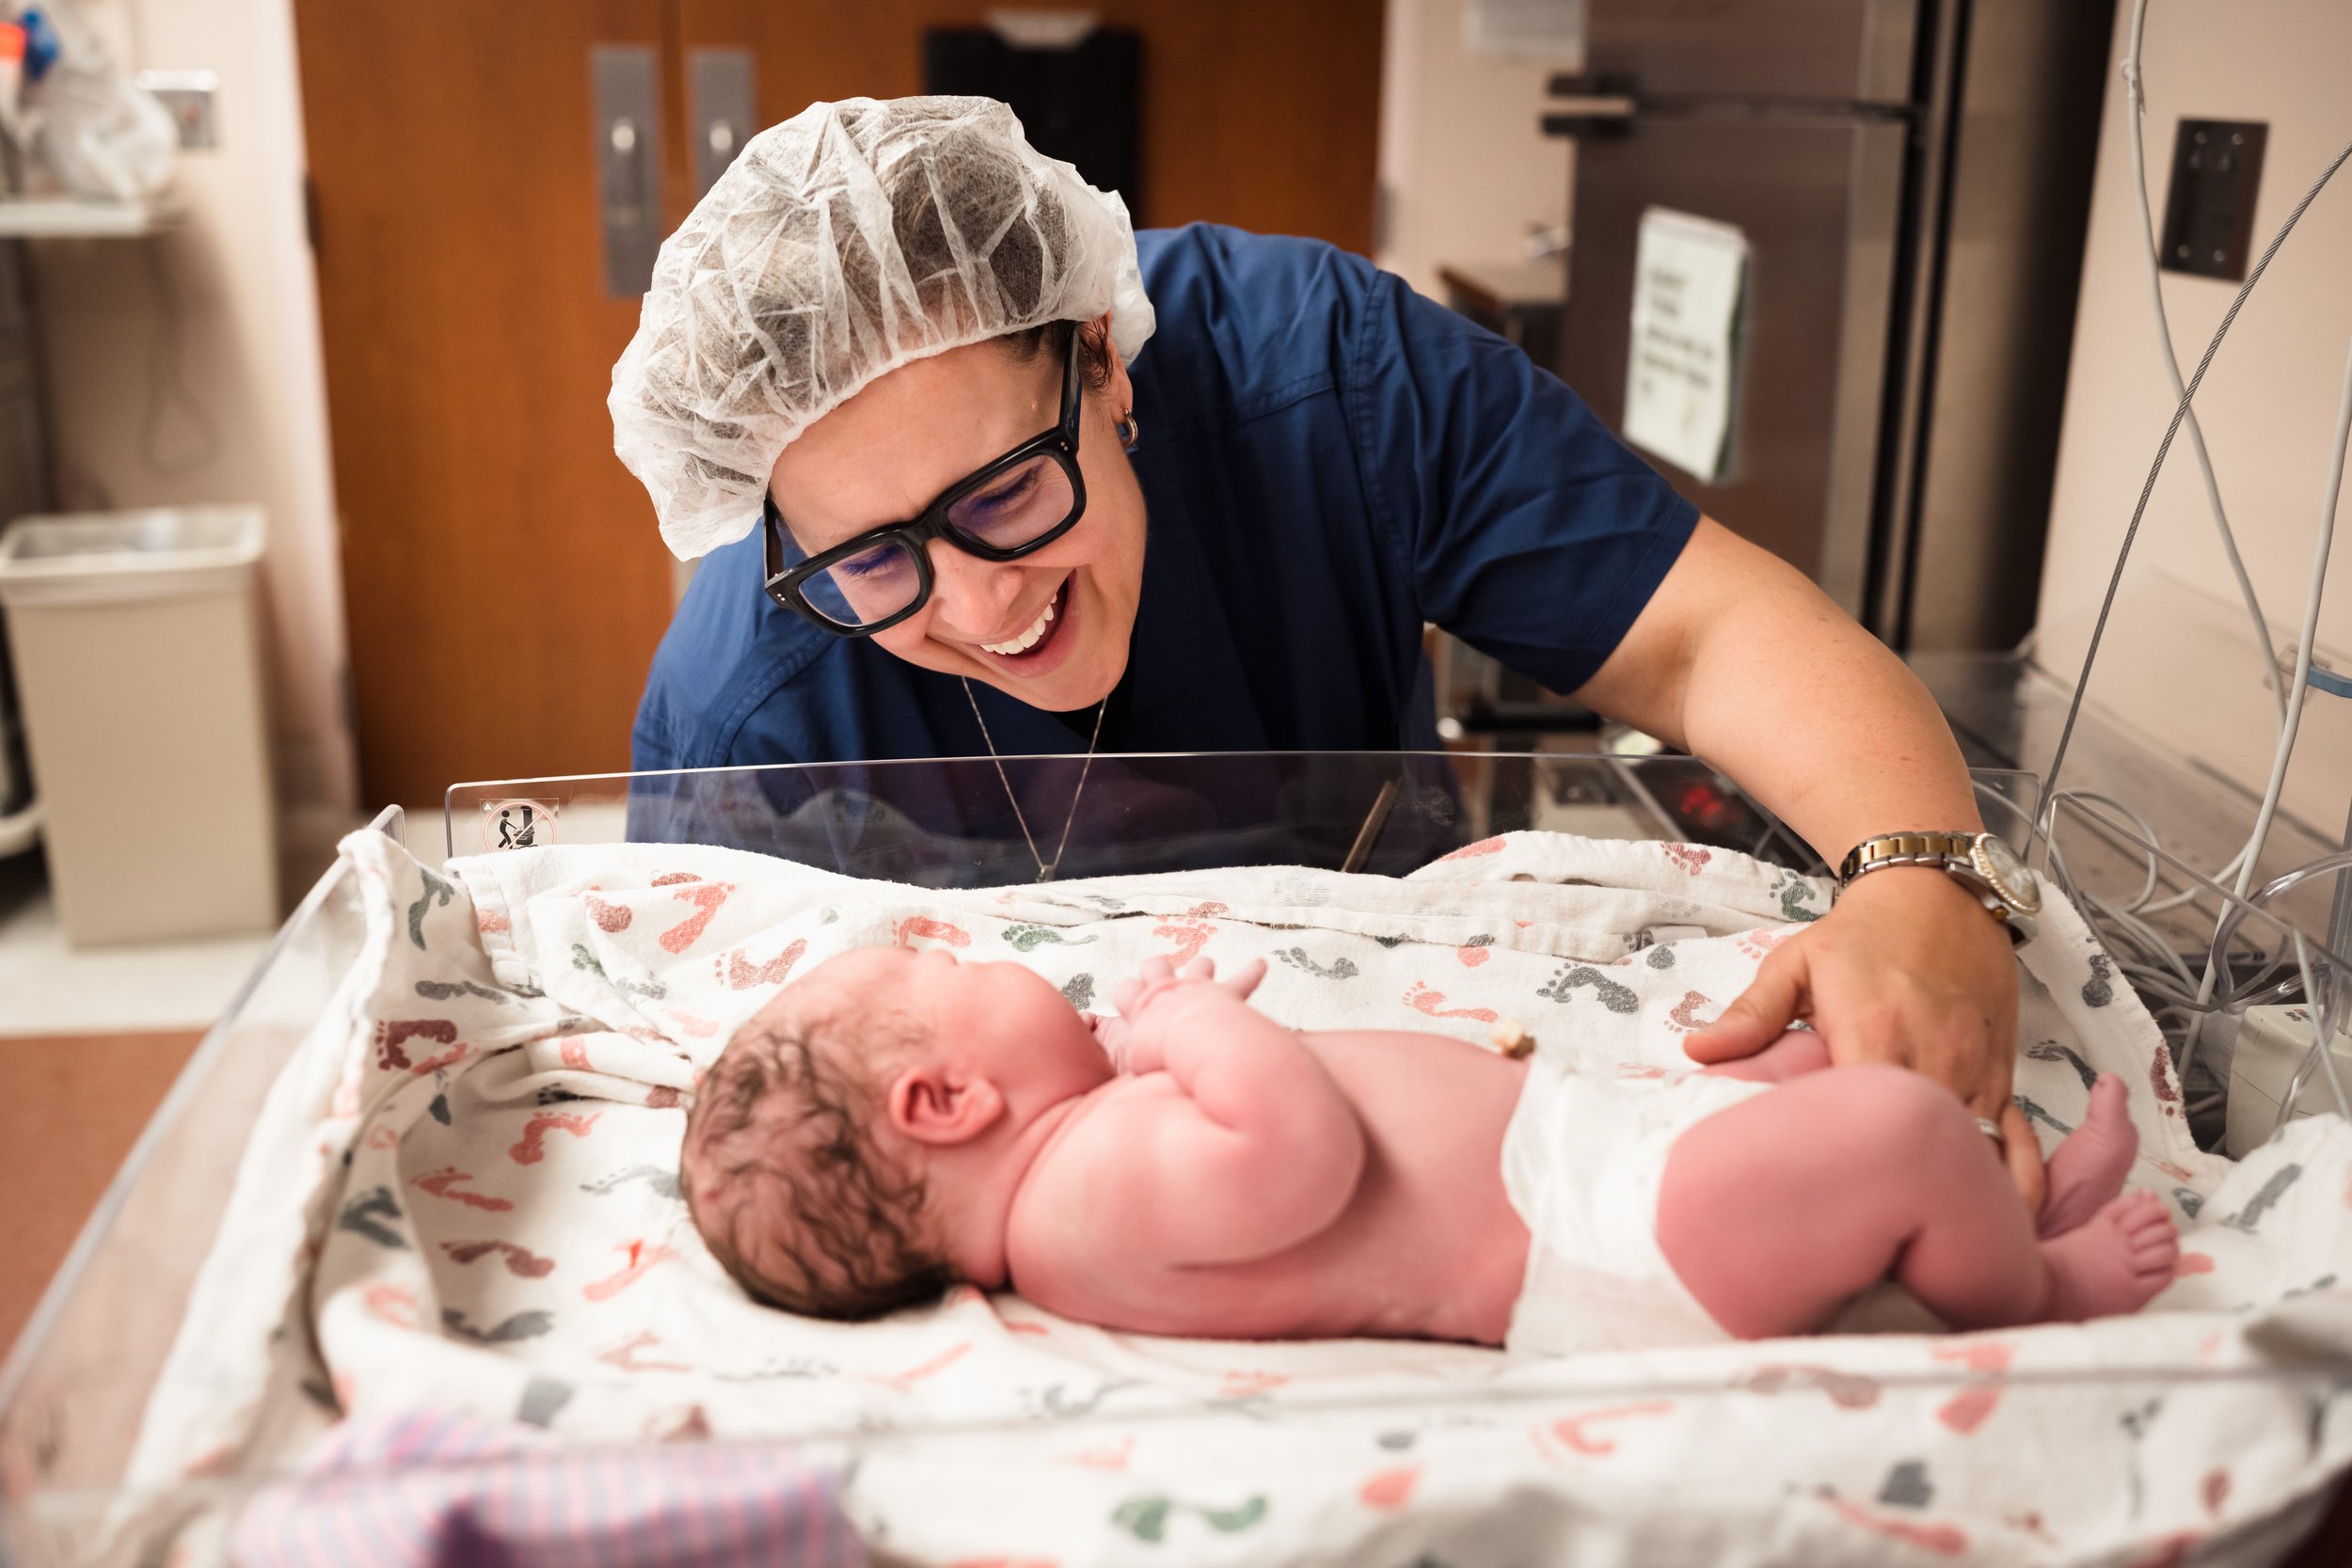 new parent smiles at newborn after family-centered cesarean birth at Dallas hospital